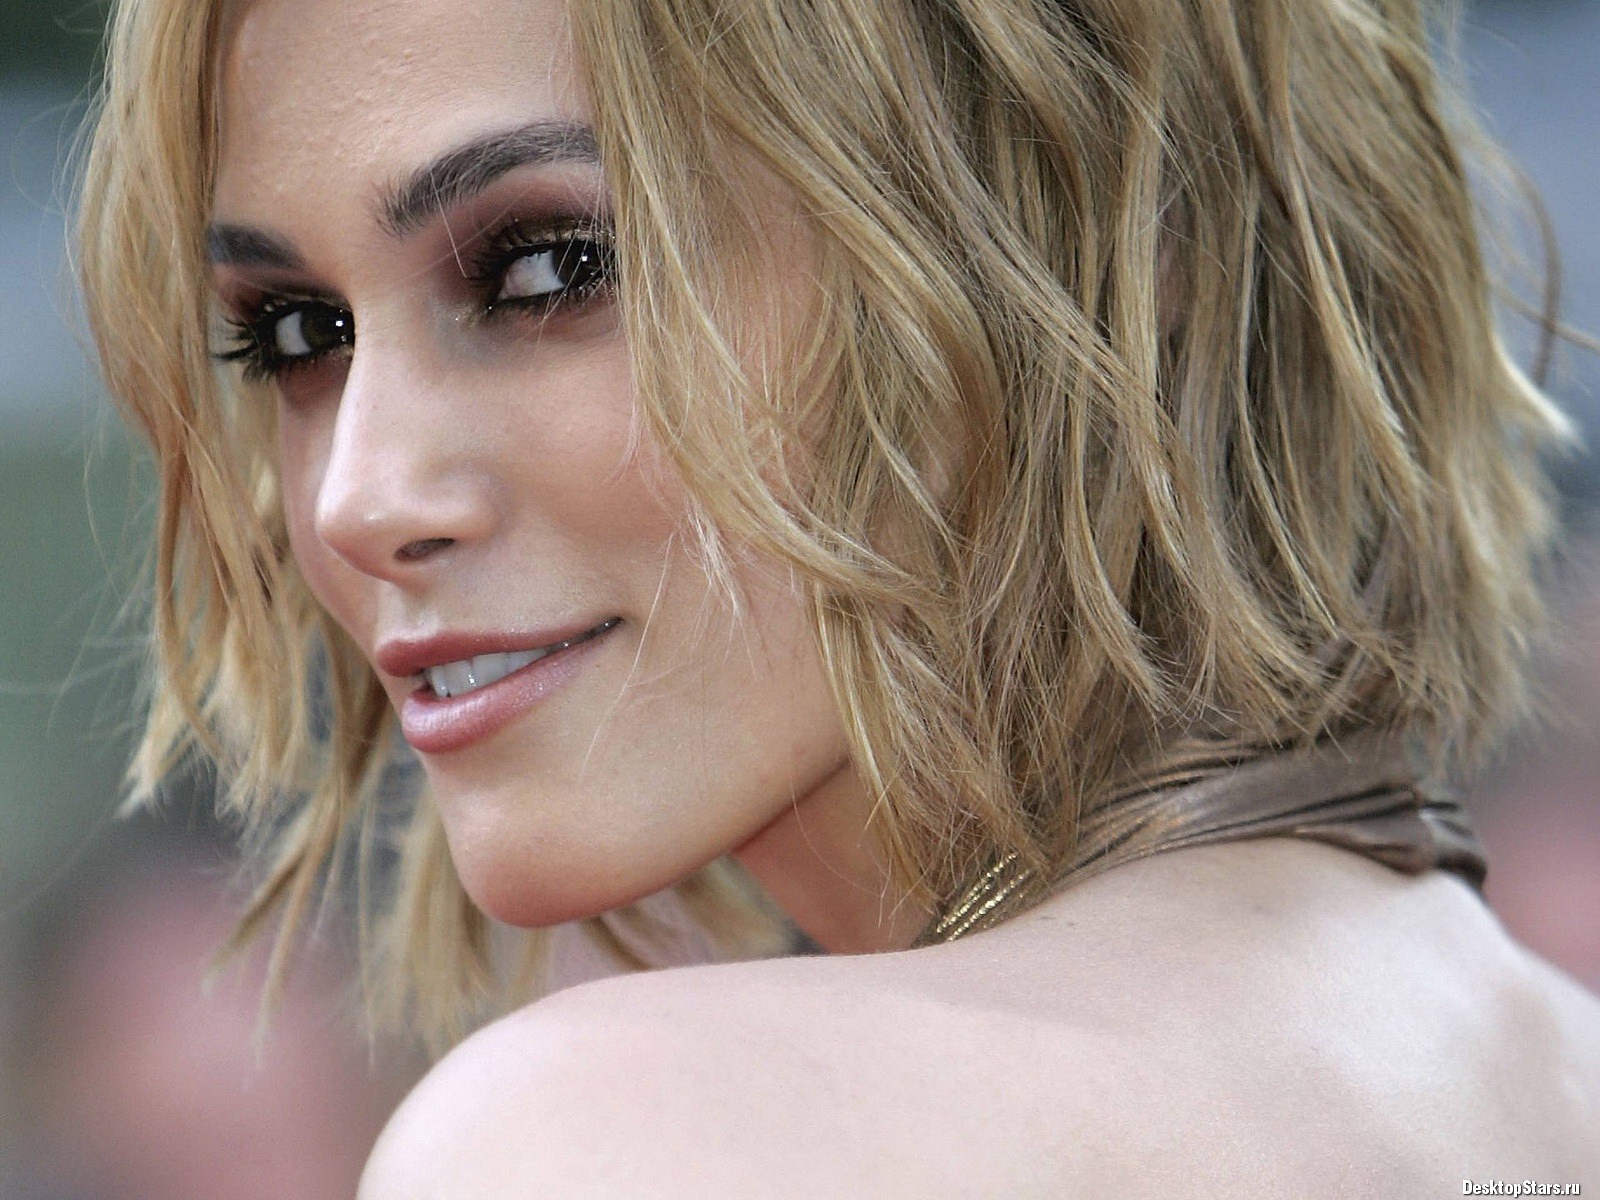 Keira Knightley #033 - 1600x1200 Wallpapers Pictures Photos Images